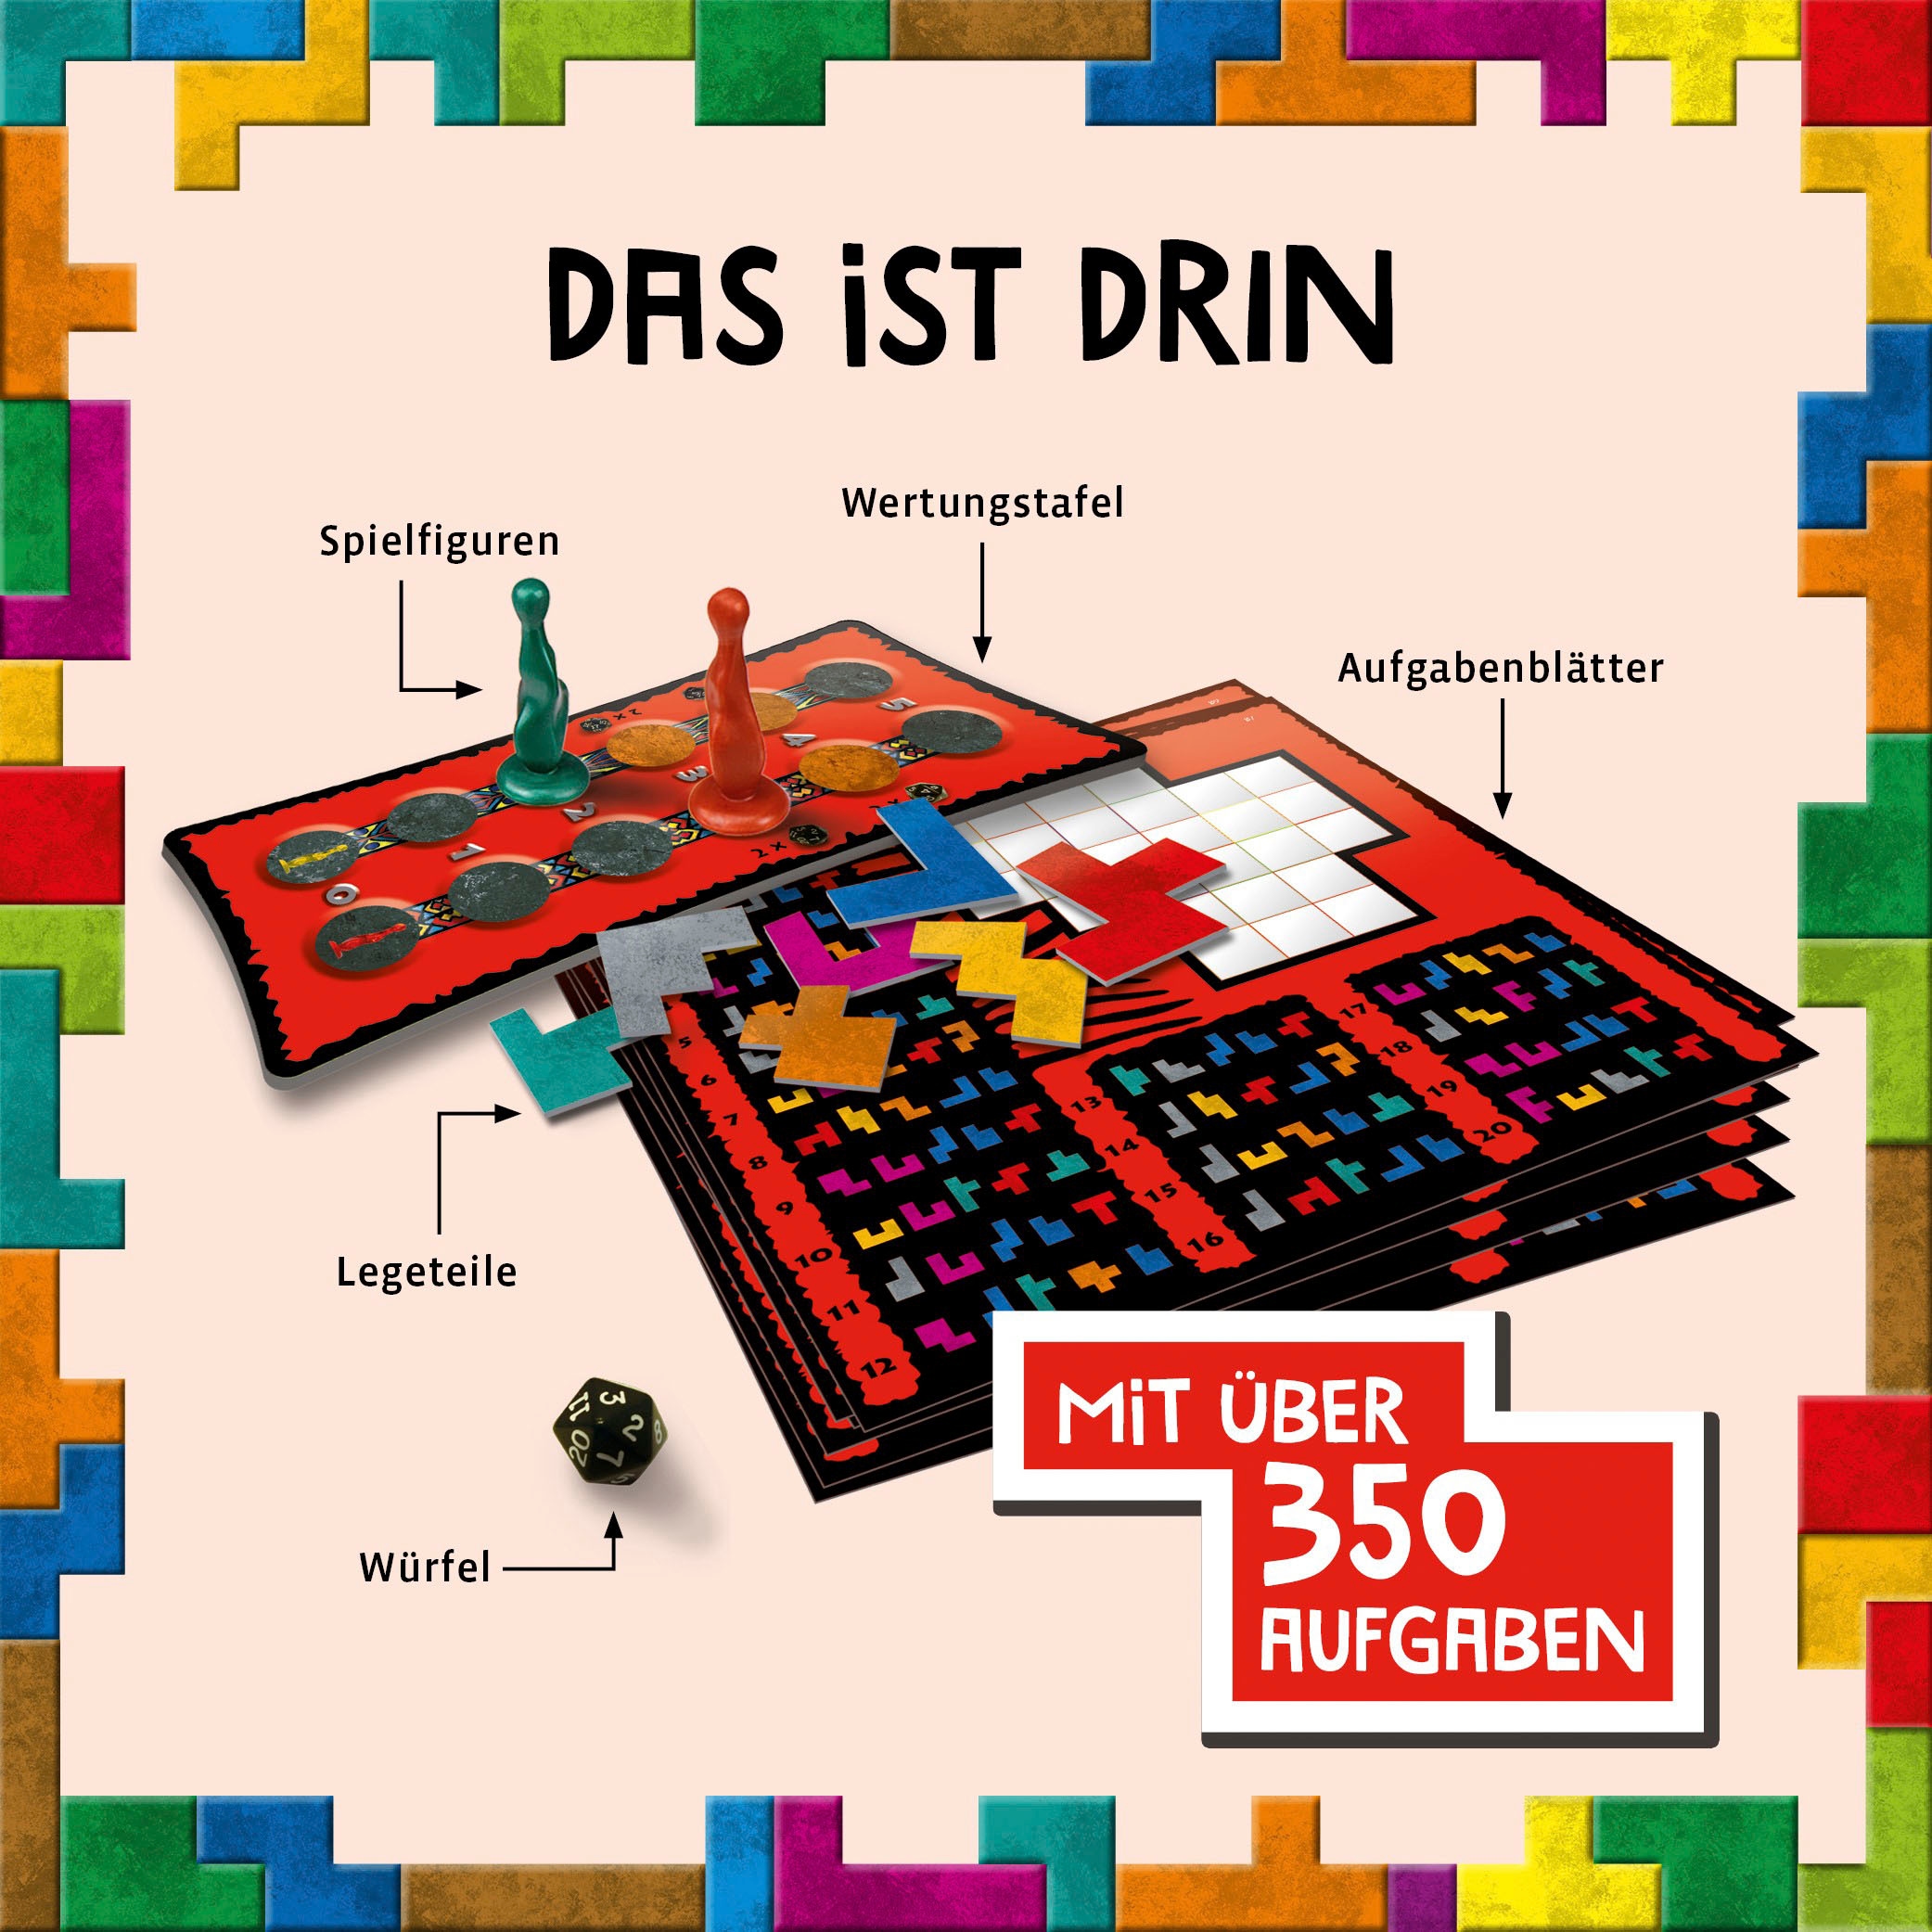 Kosmos Spiel »Ubongo! Duell«, Made in Germany